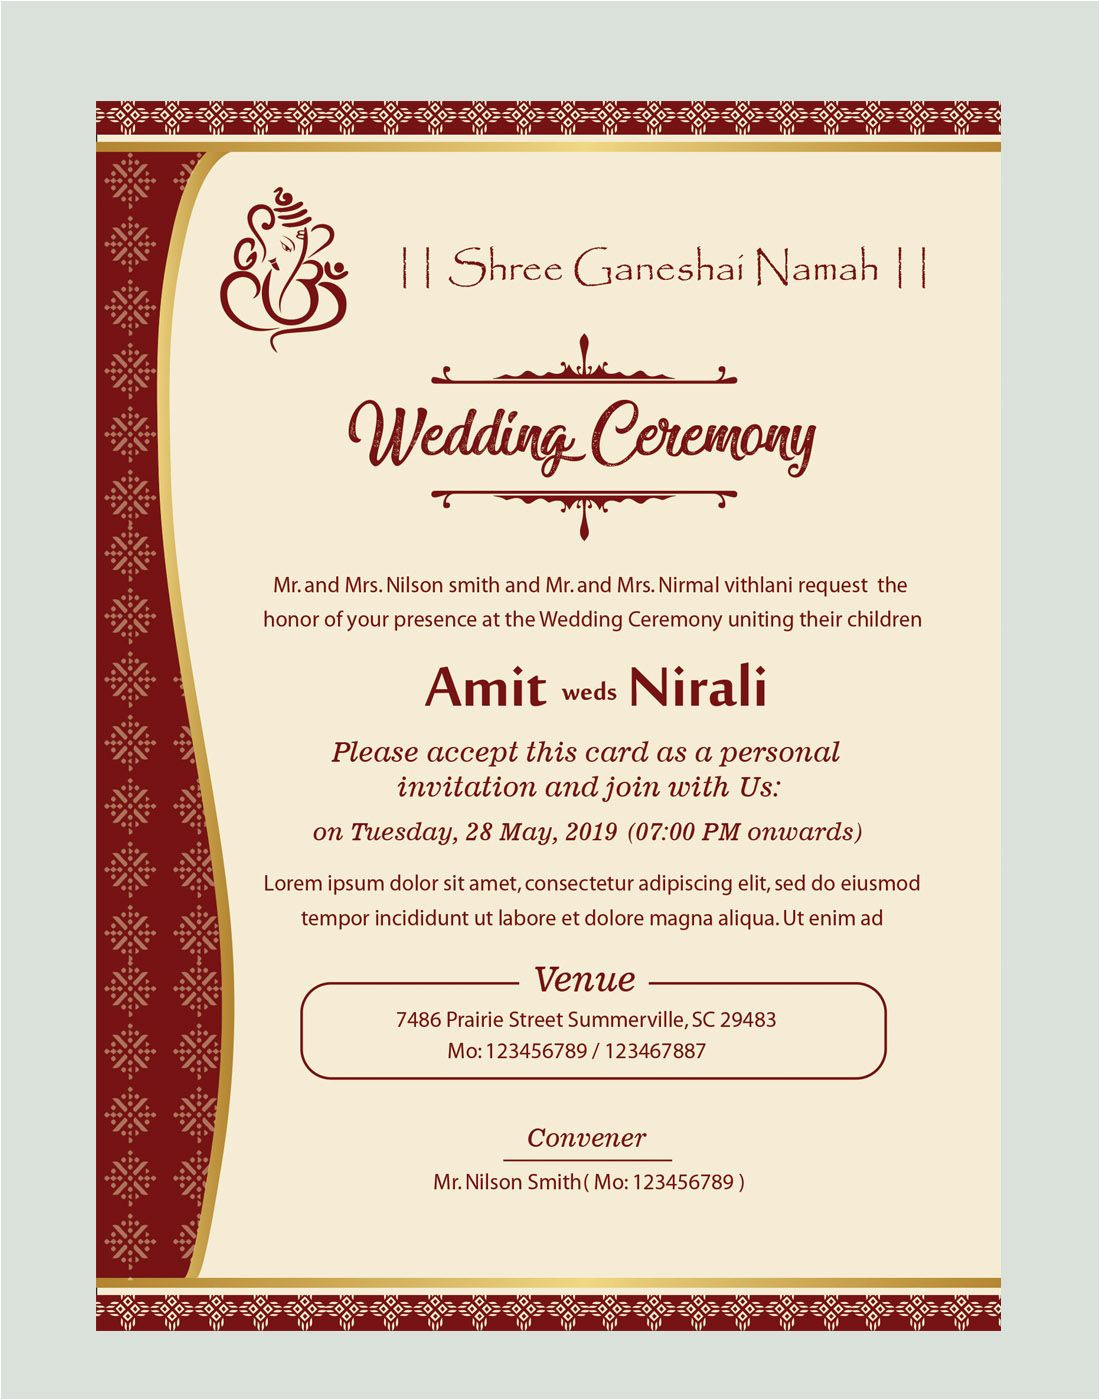 Naming Ceremony Invitation Card Background Free Kankotri Card Template with Images Printable